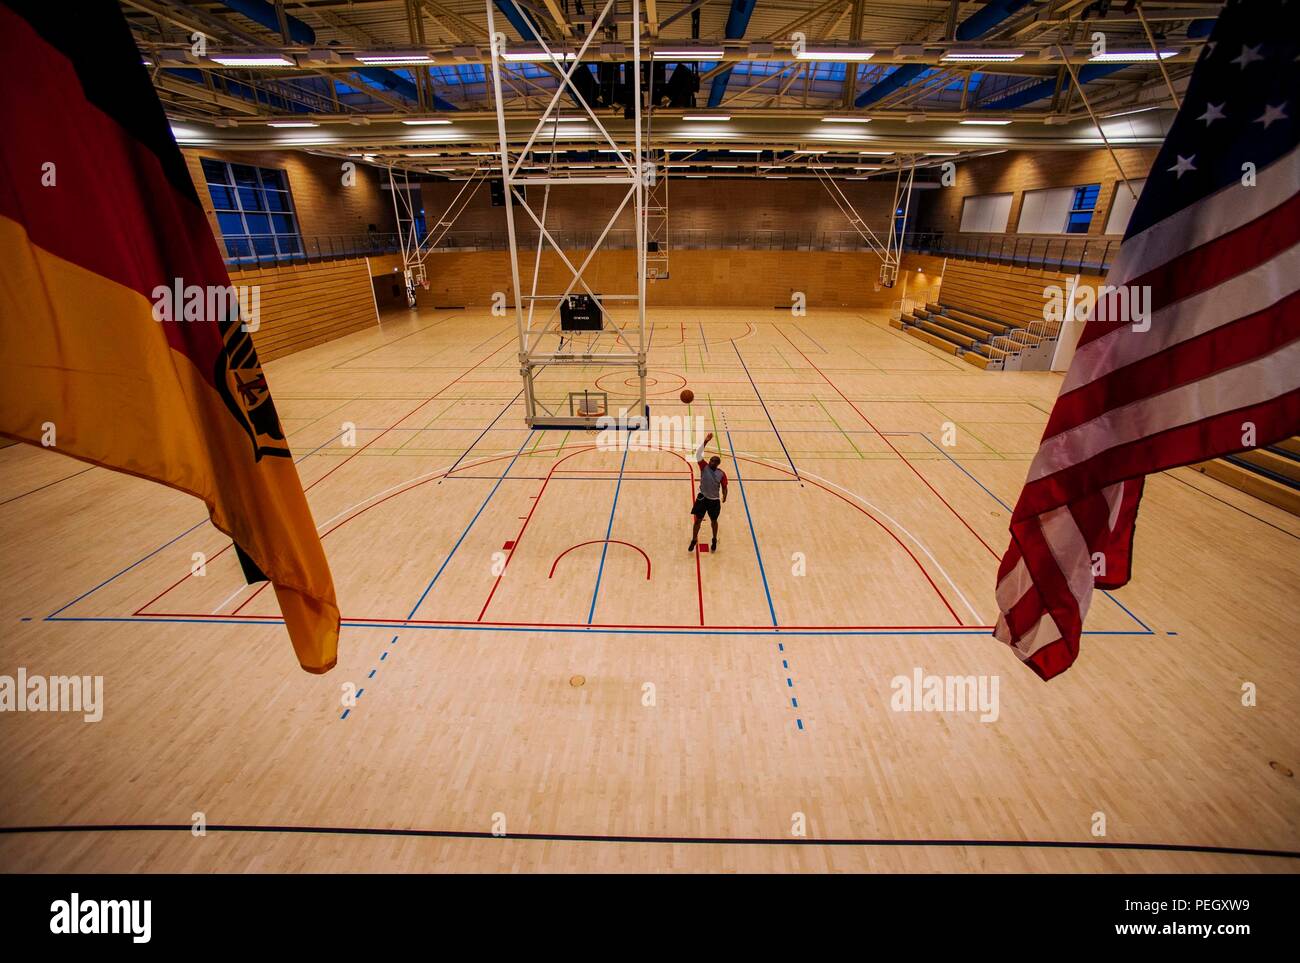 Basketball Court and Indoor Track